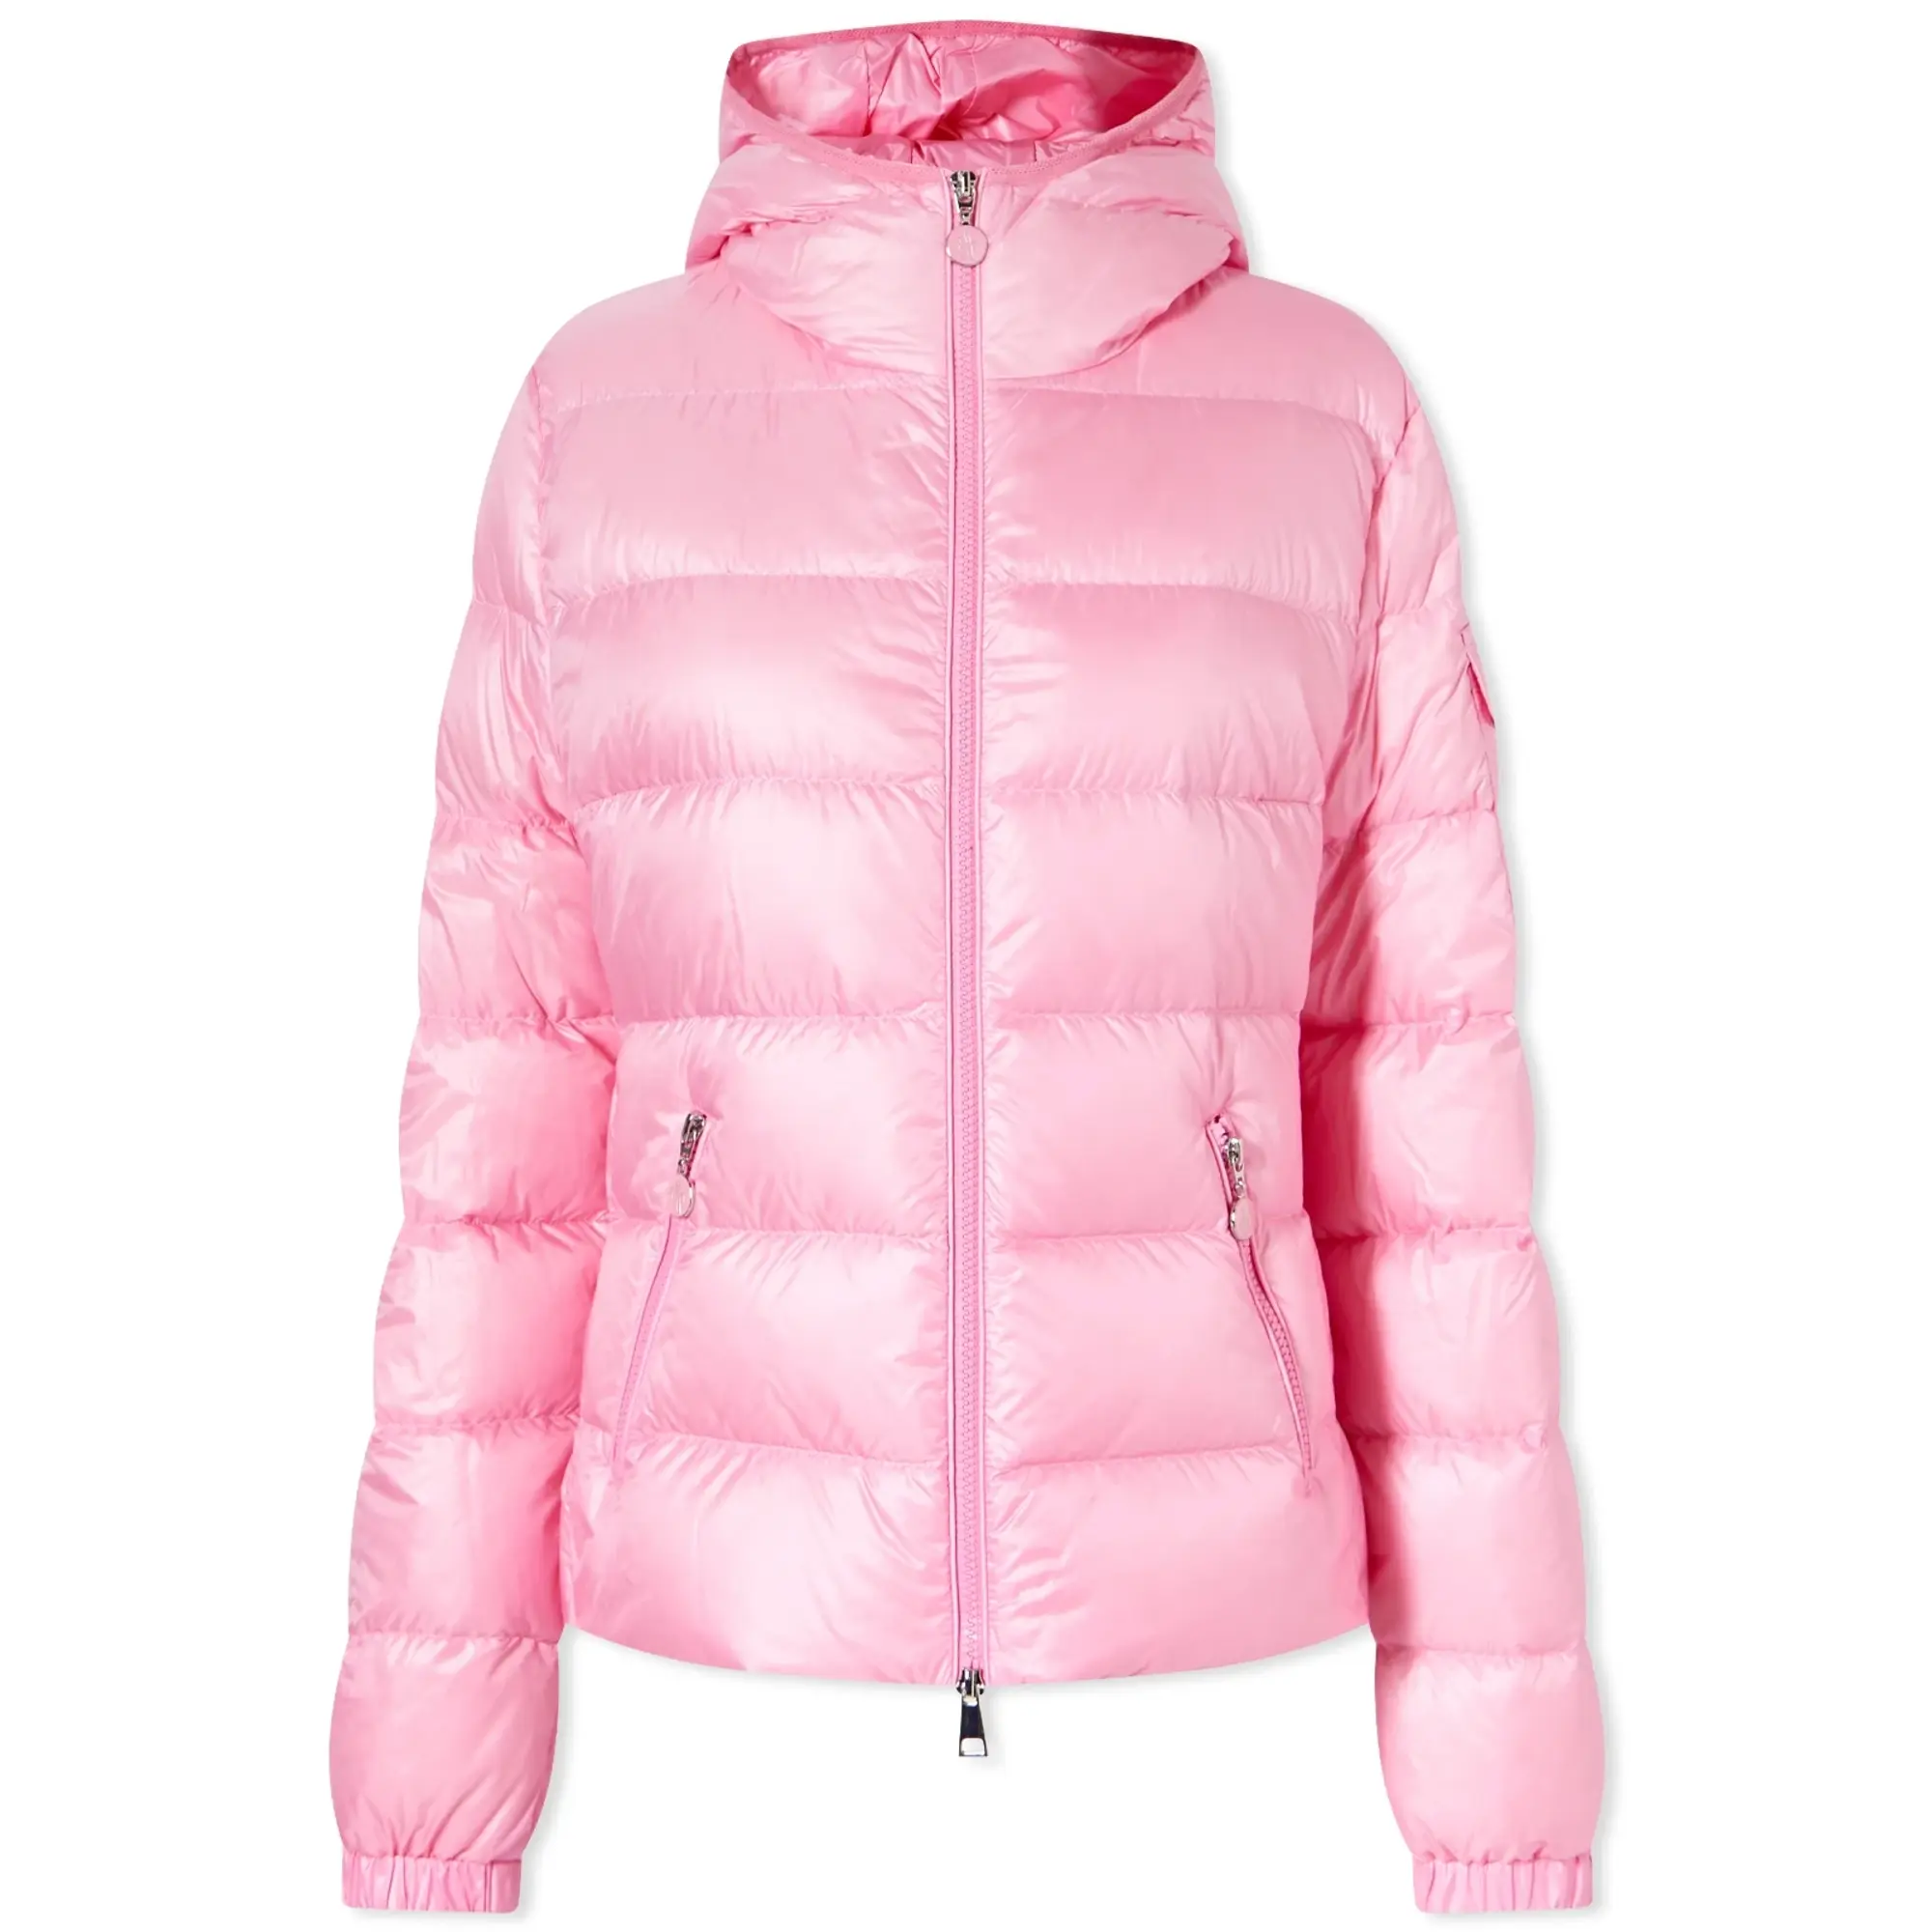 Moncler Women's Gles Padded Jacket With Hood Pink